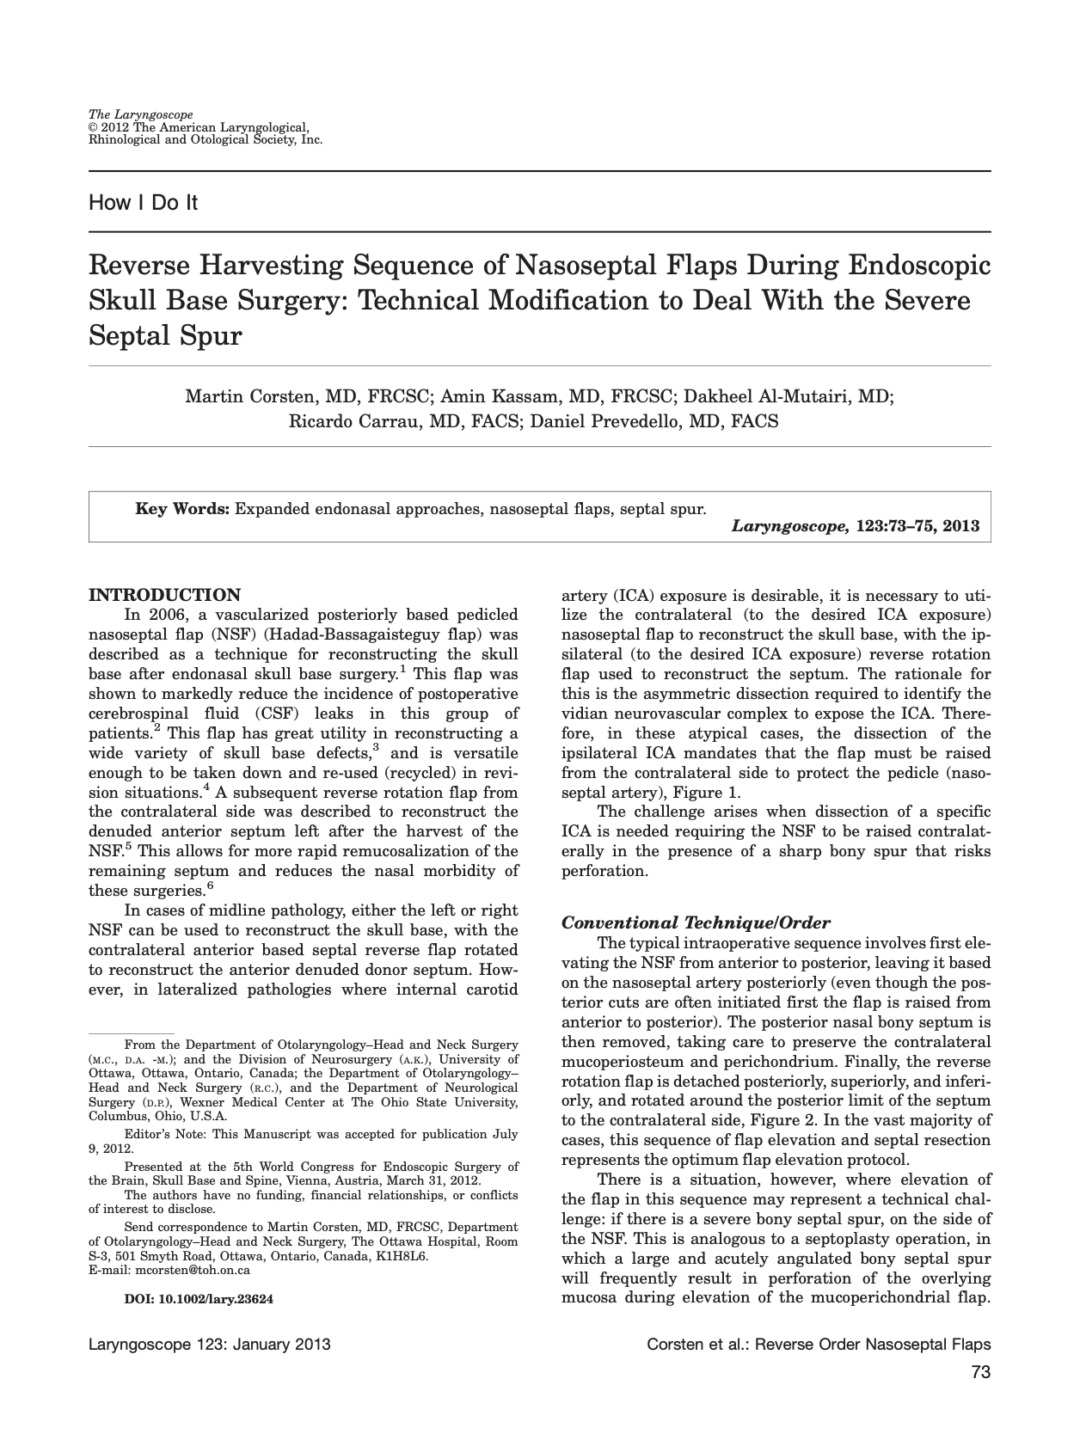 Reverse Harvesting Sequence of Nasoseptal Flaps During Endoscopic Skull Base Surgery: Technical Modification to Deal With the Severe Septal Spur